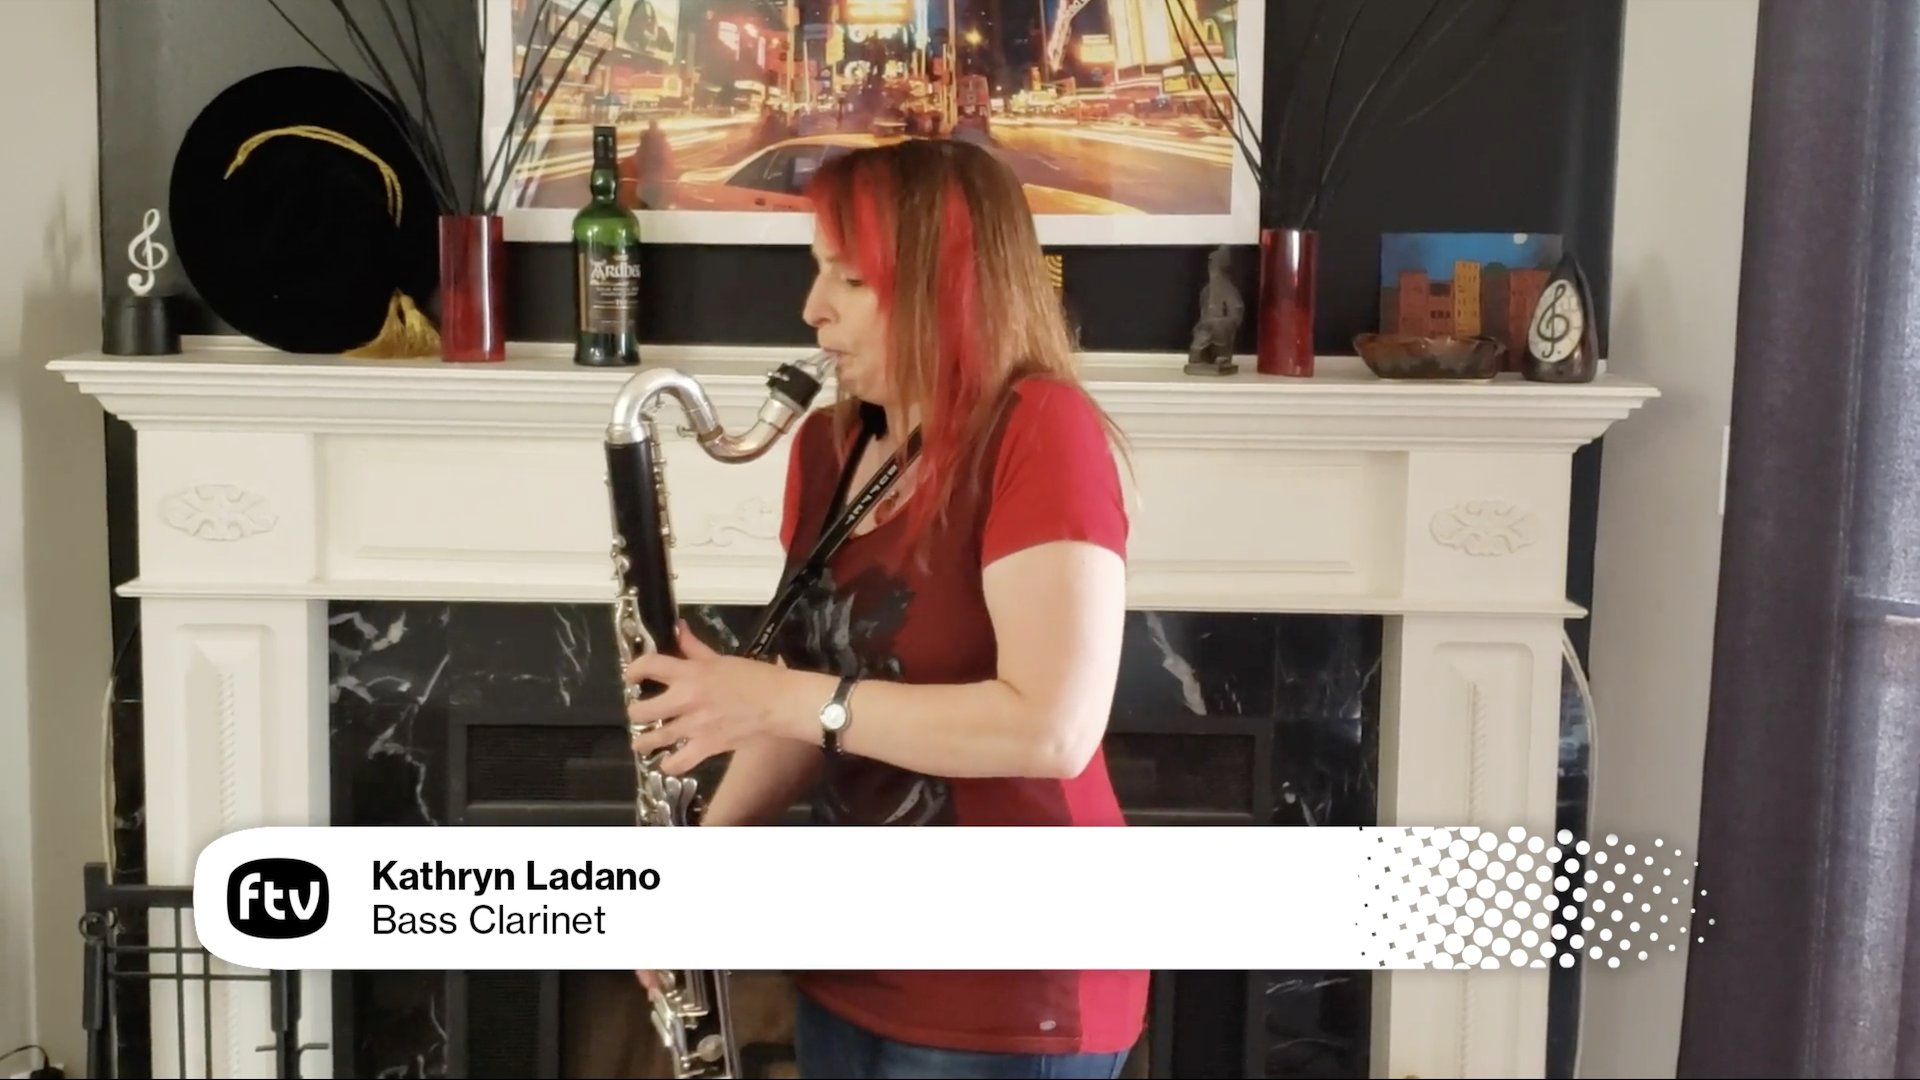 Kathryn Ladano performs on bass clarinet during the concert